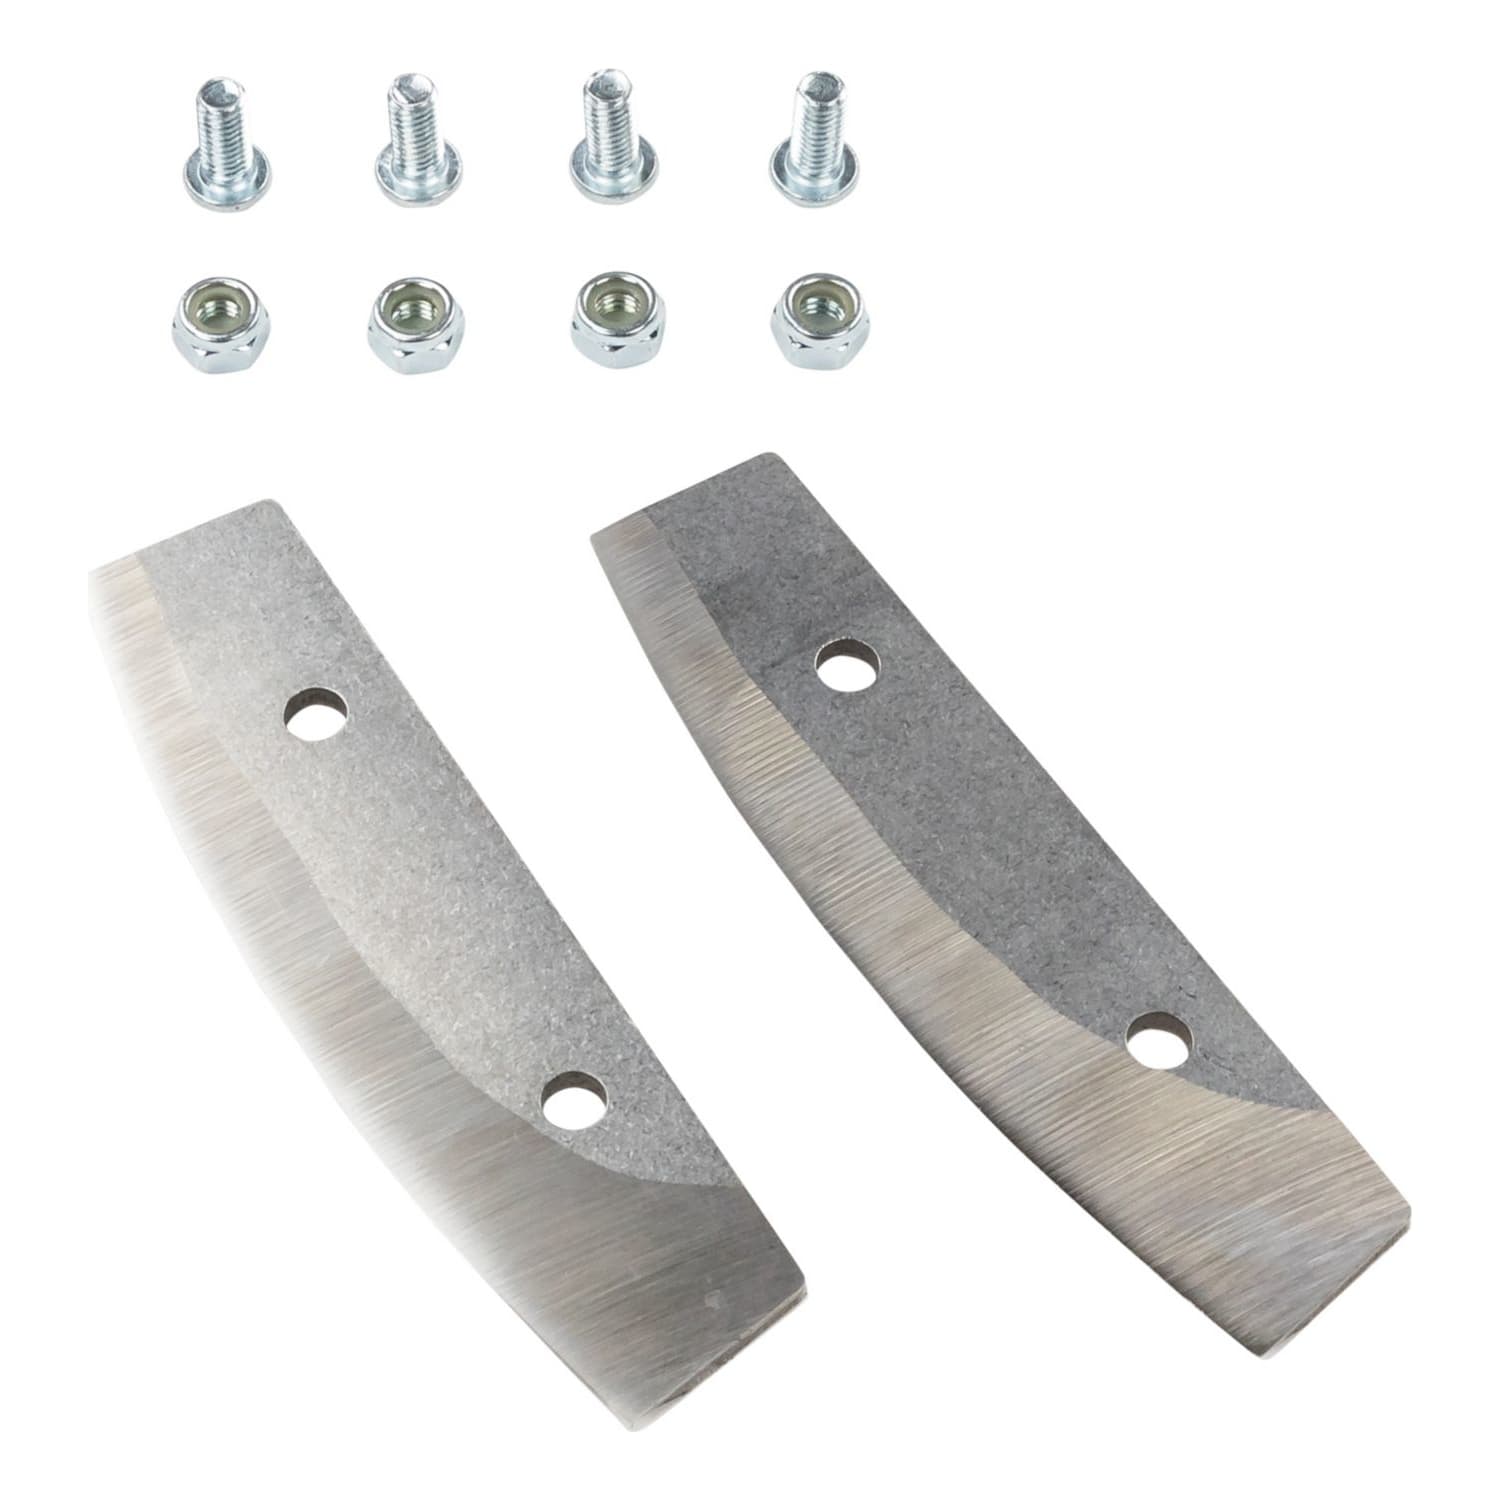 Thunder Bay Trophy Strike Auger Replacement Blades